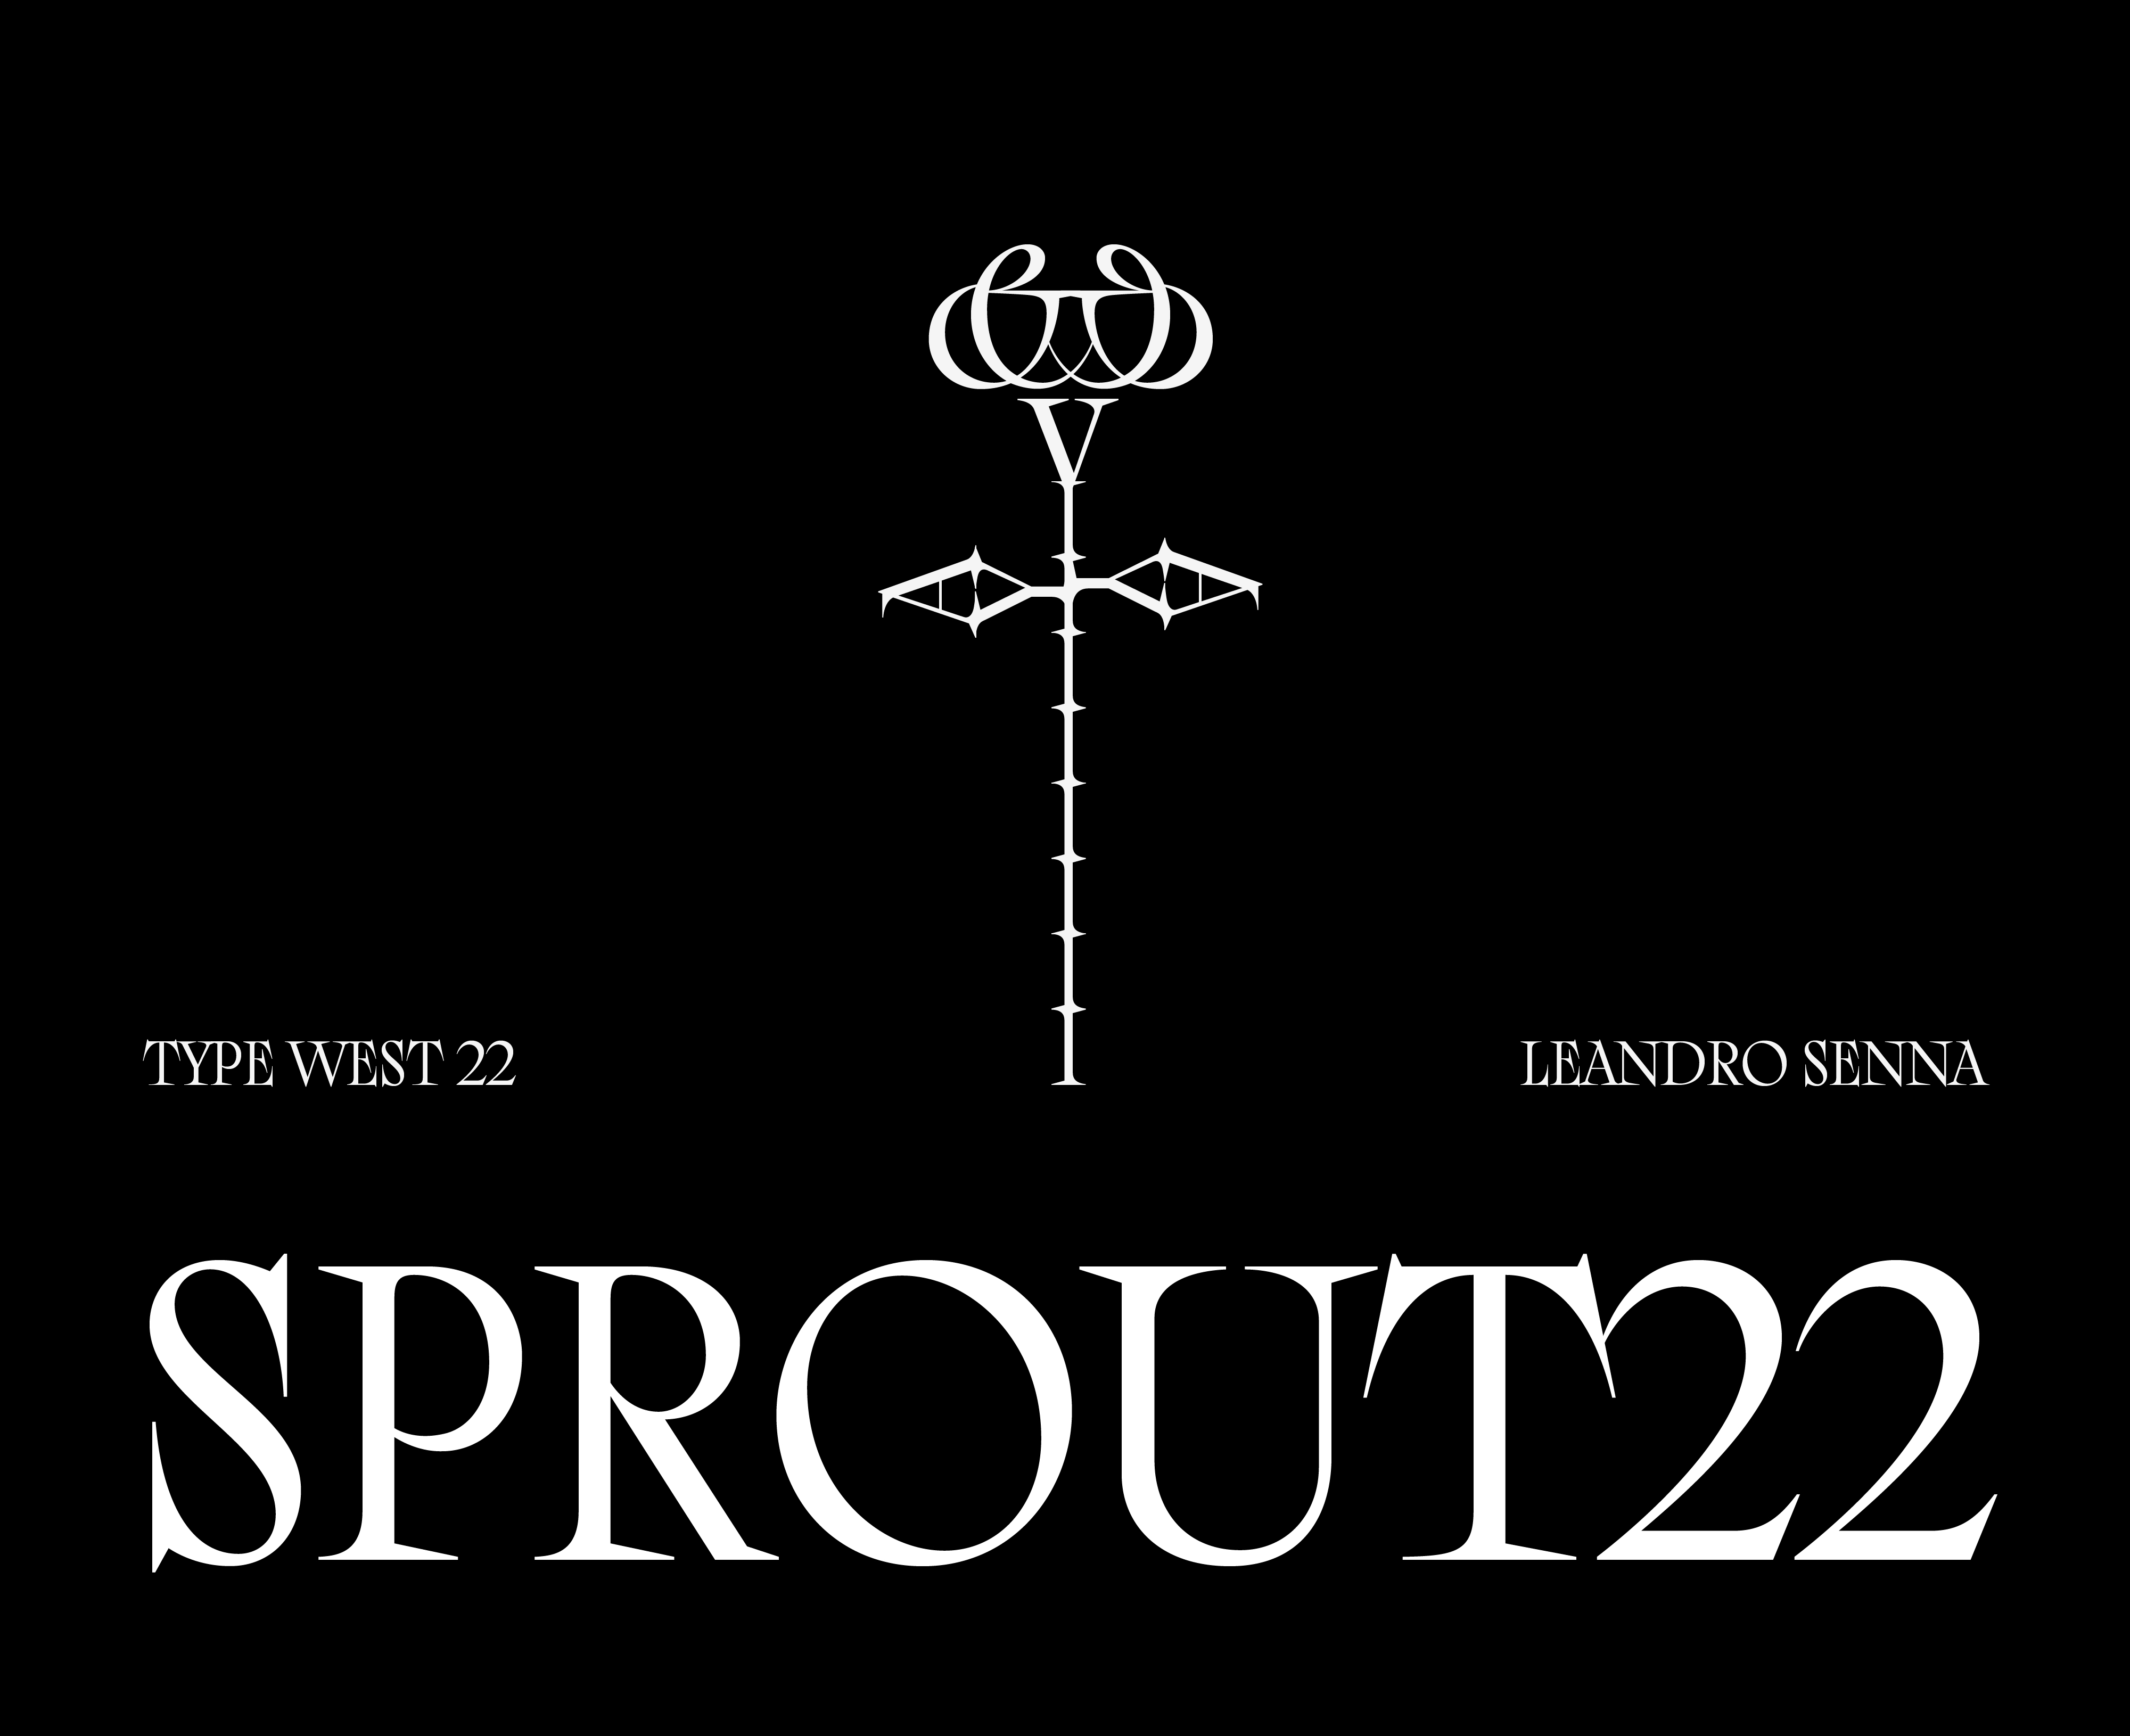 This is a cover, black Background and White Type, it says Leandro Senna/TypeWest22 and Sprout22 which is the temporary name for this typeface family. In the center, there is a white flower constructed with some of the glyphs (& v I and V A)